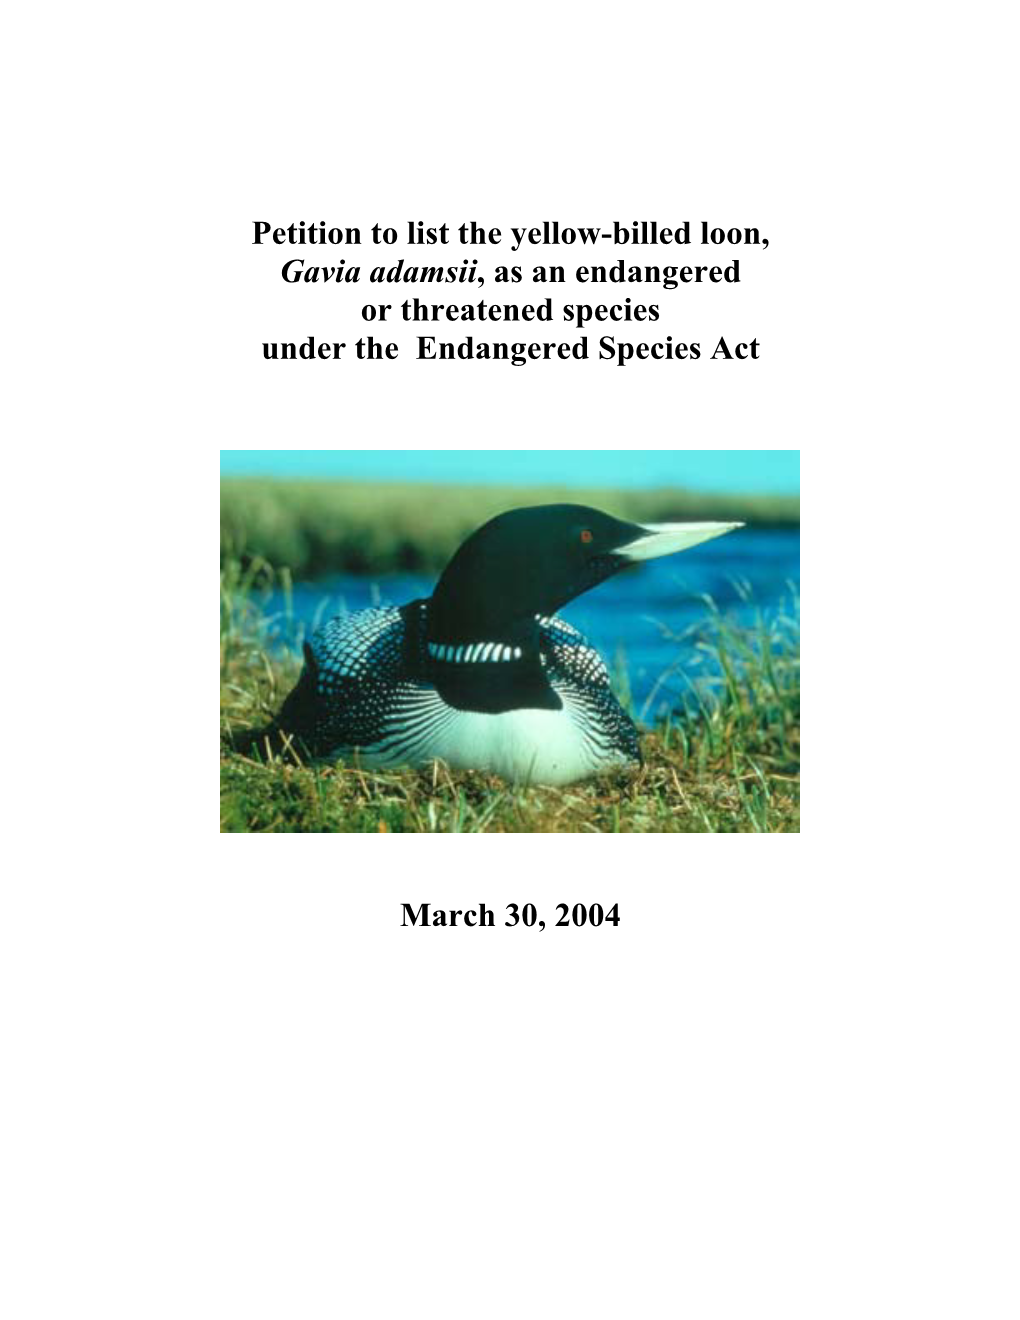 Petition to List the Yellow-Billed Loon, Gavia Adamsii, As an Endangered Or Threatened Species Under the Endangered Species Act